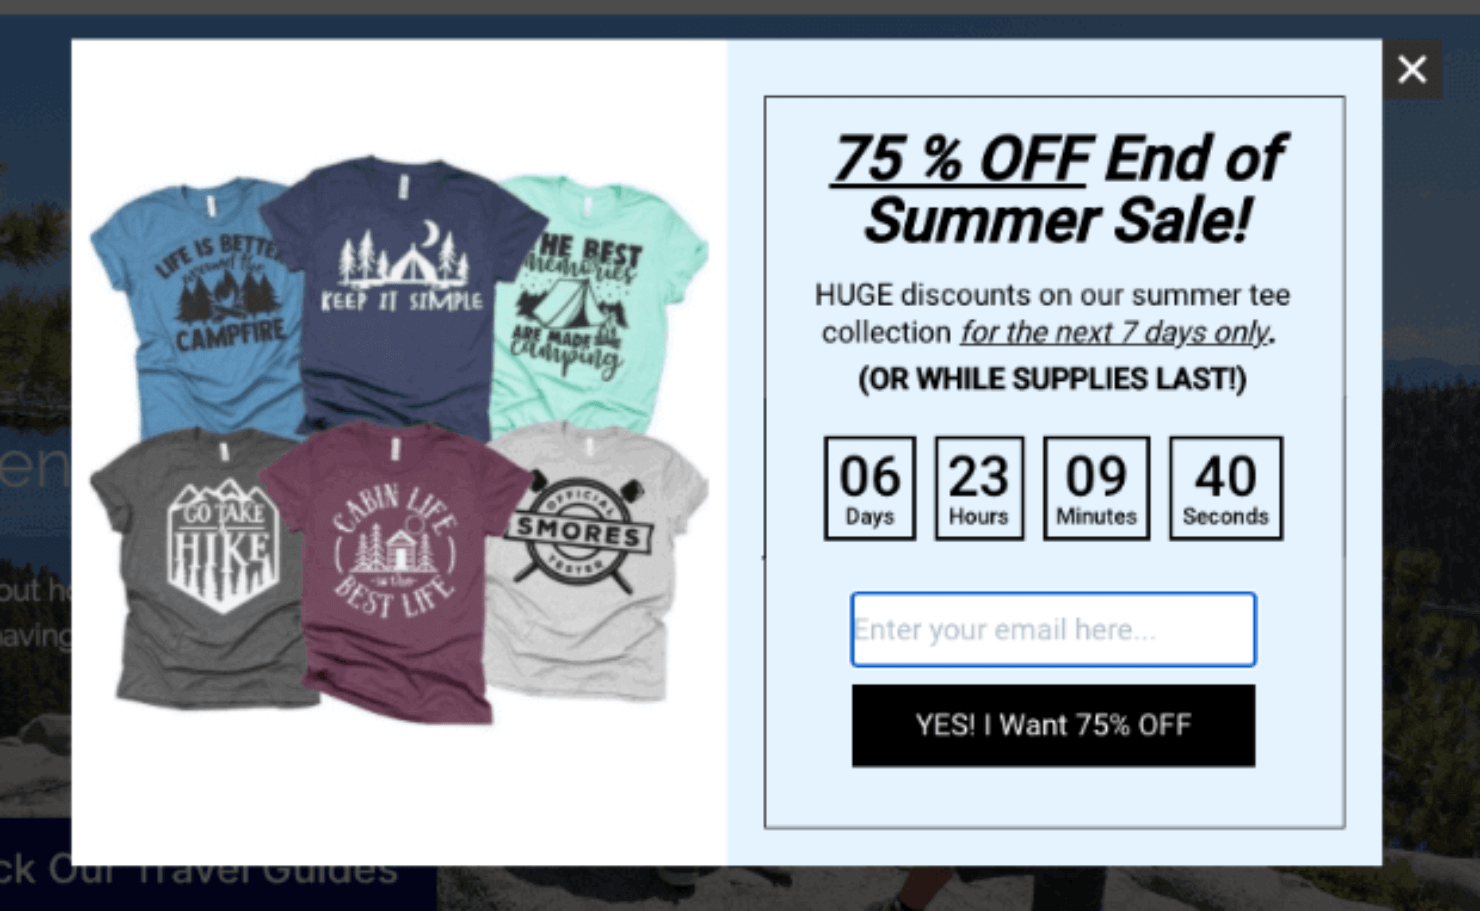 Here’s an example of a flash sale campaign from an apparel brand: